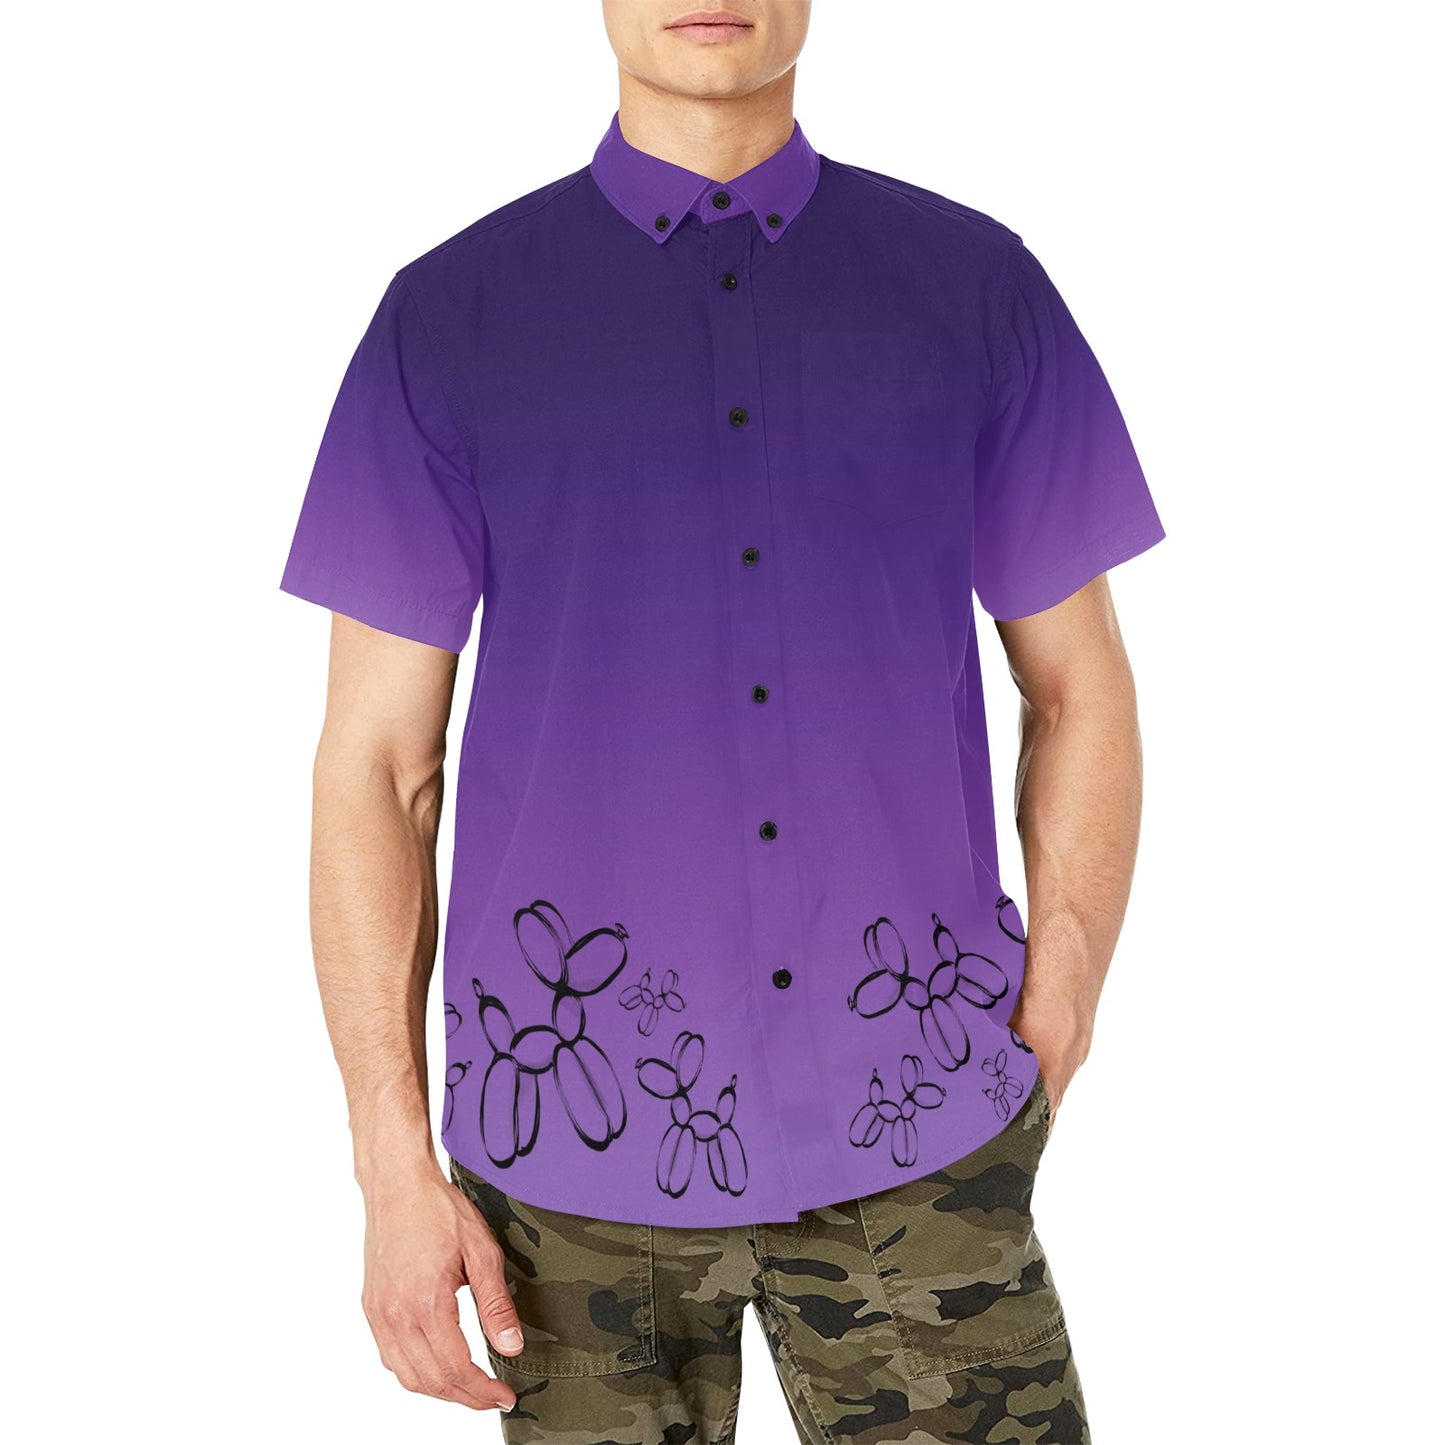 Purple shirt for balloon artists and balloon twisters